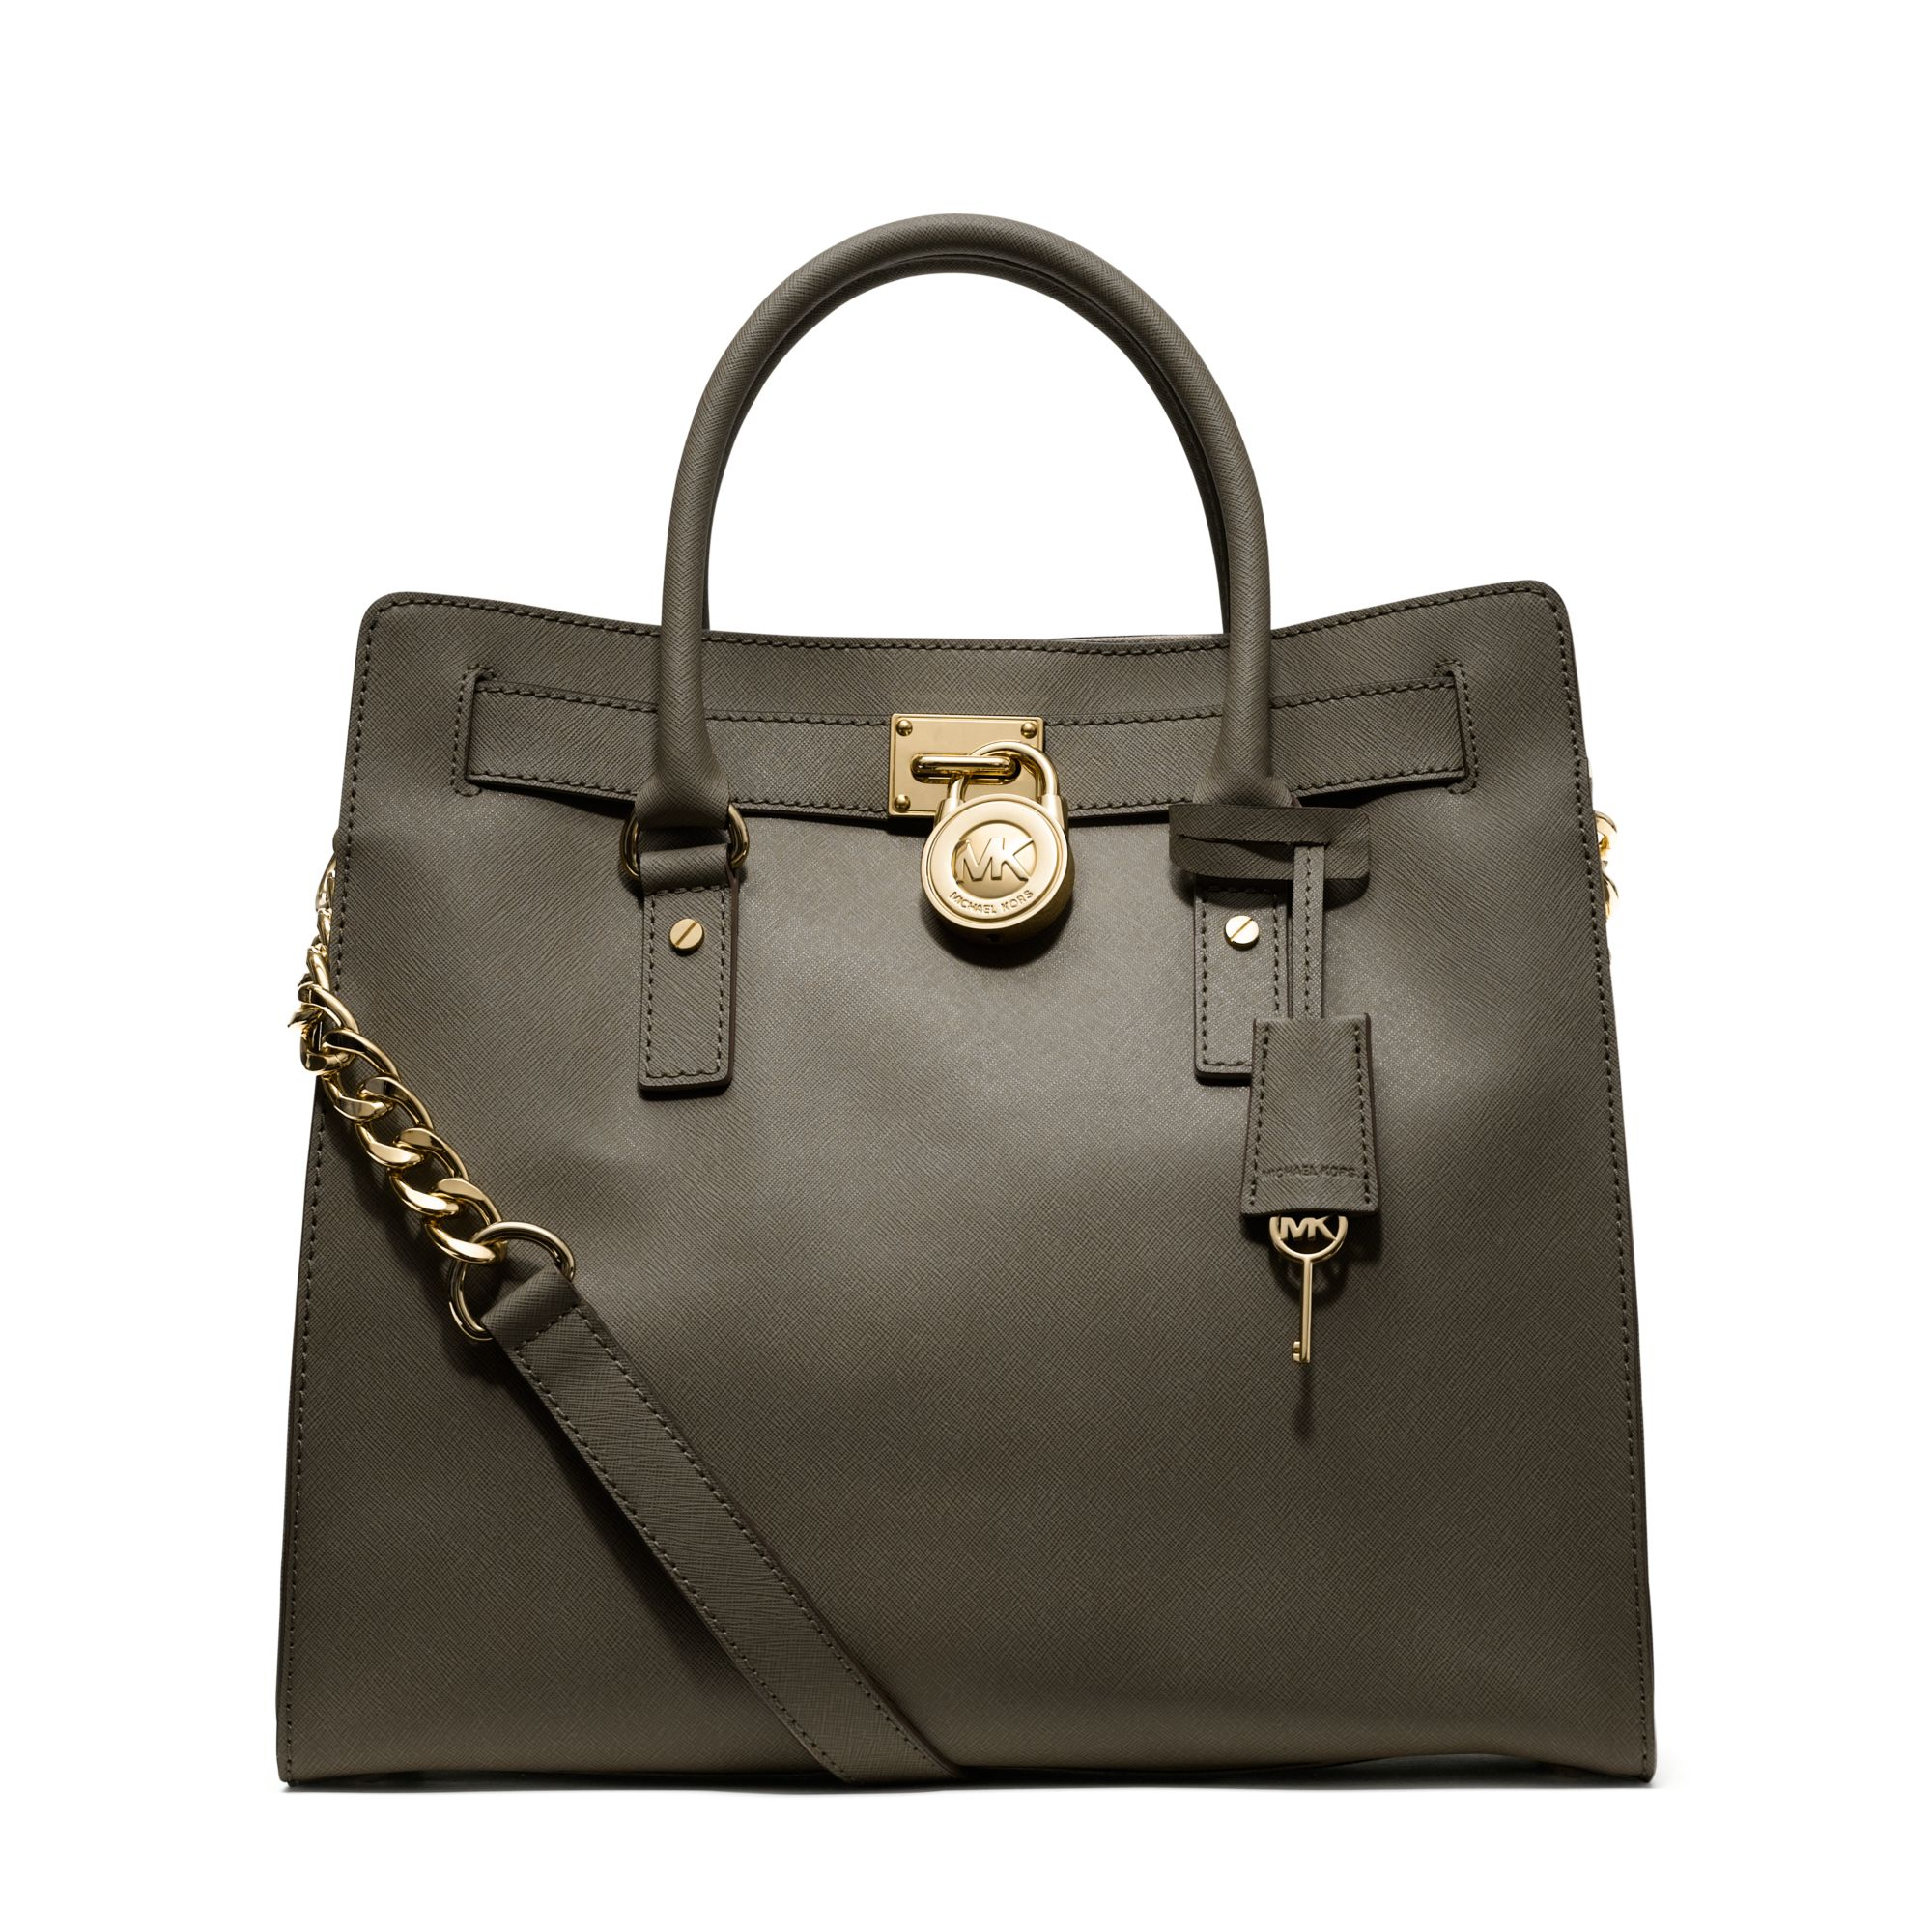 Lyst - Michael kors Hamilton Large Saffiano Leather Tote in Green